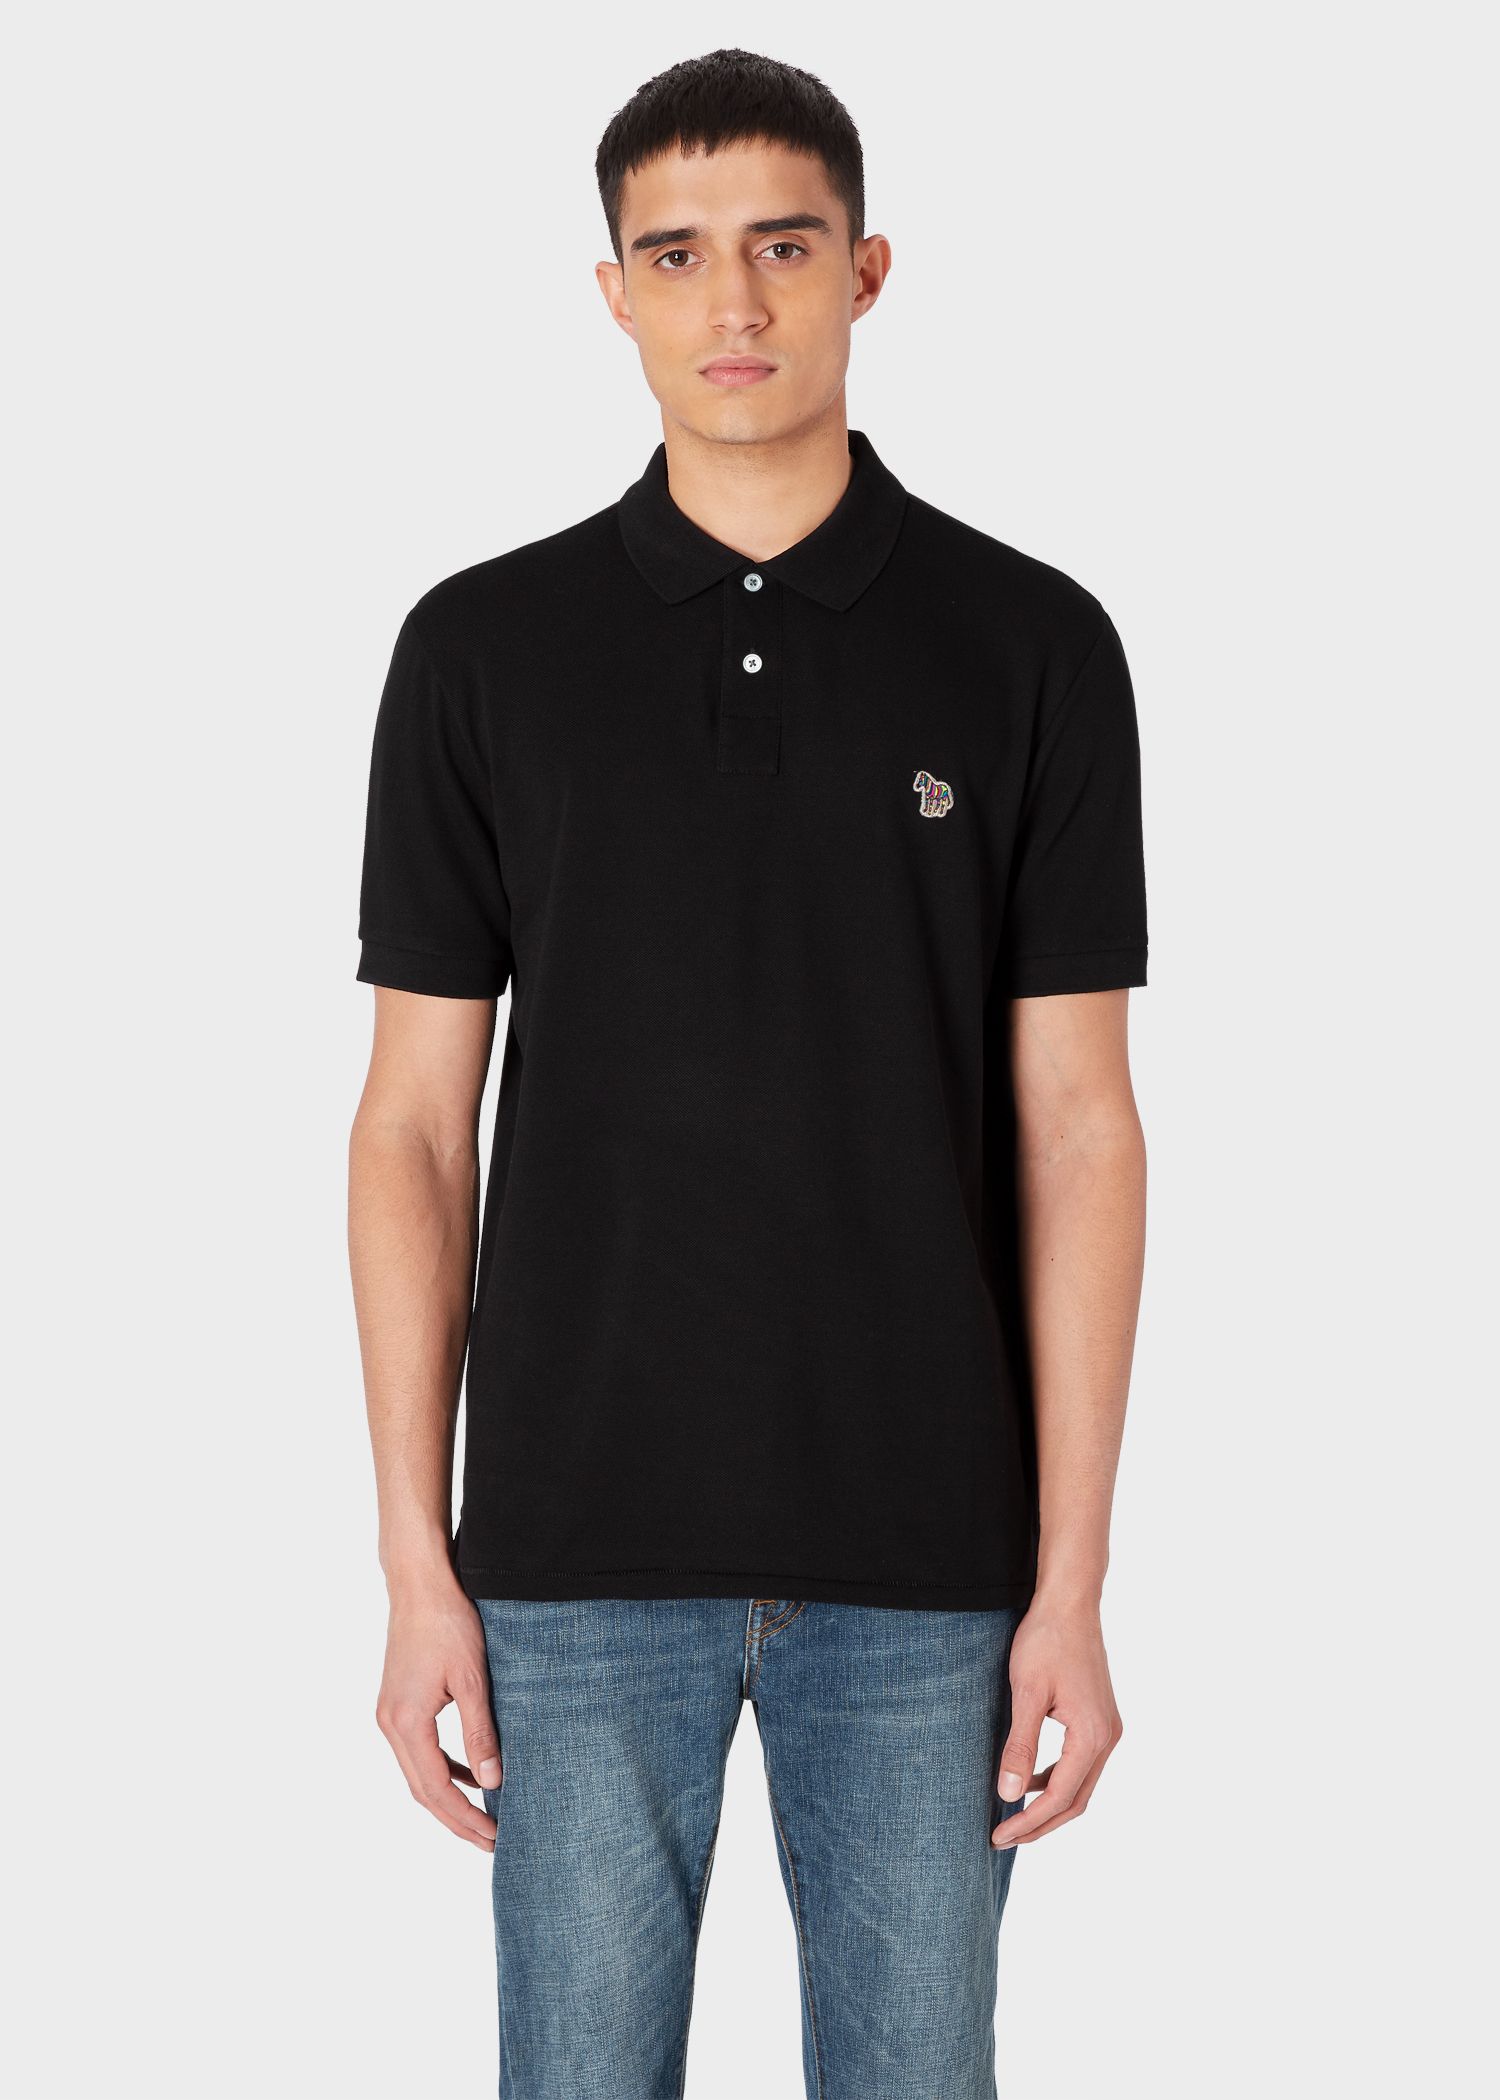 polo shirts with m logo